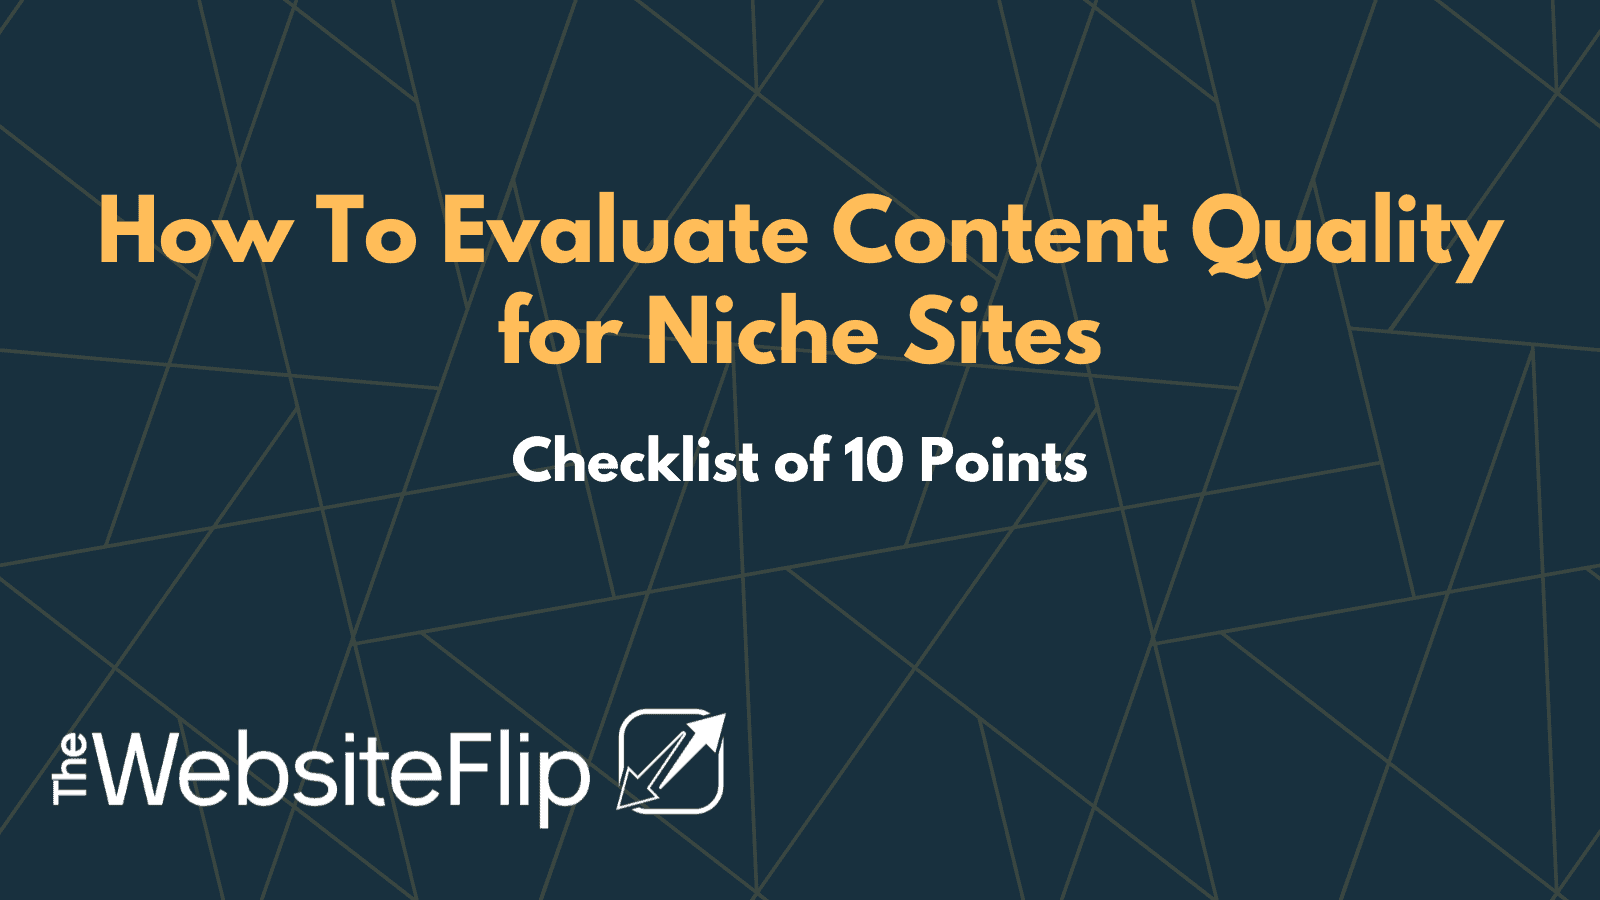 How To Evaluate Content Quality for Niche Sites